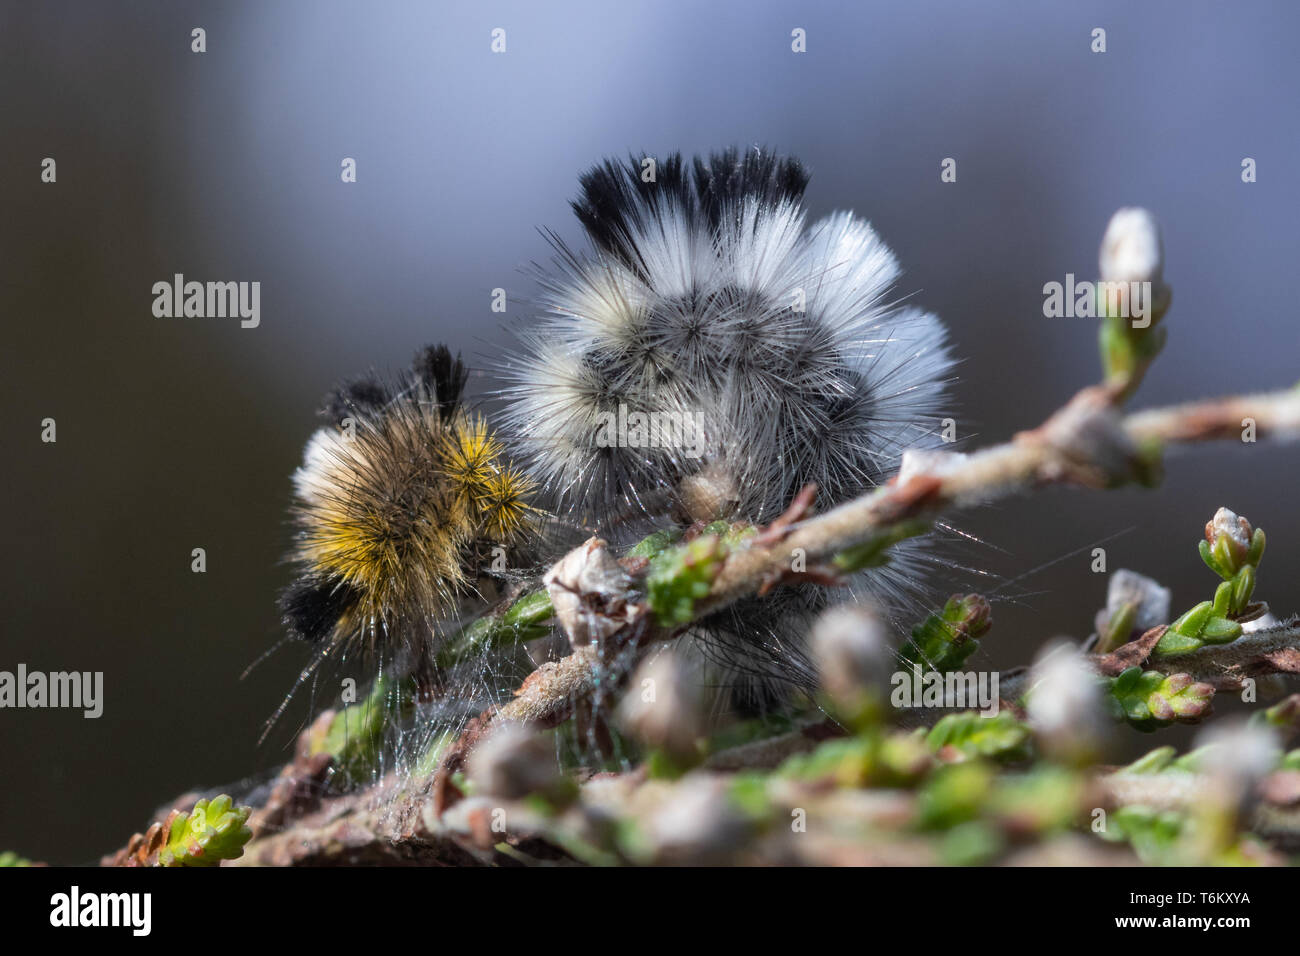 Pale tussock moth (Calliteara pudibunda) larva or caterpillar just after moulting (molting) next to its old molt, moult, skin, on heather plant, UK Stock Photo